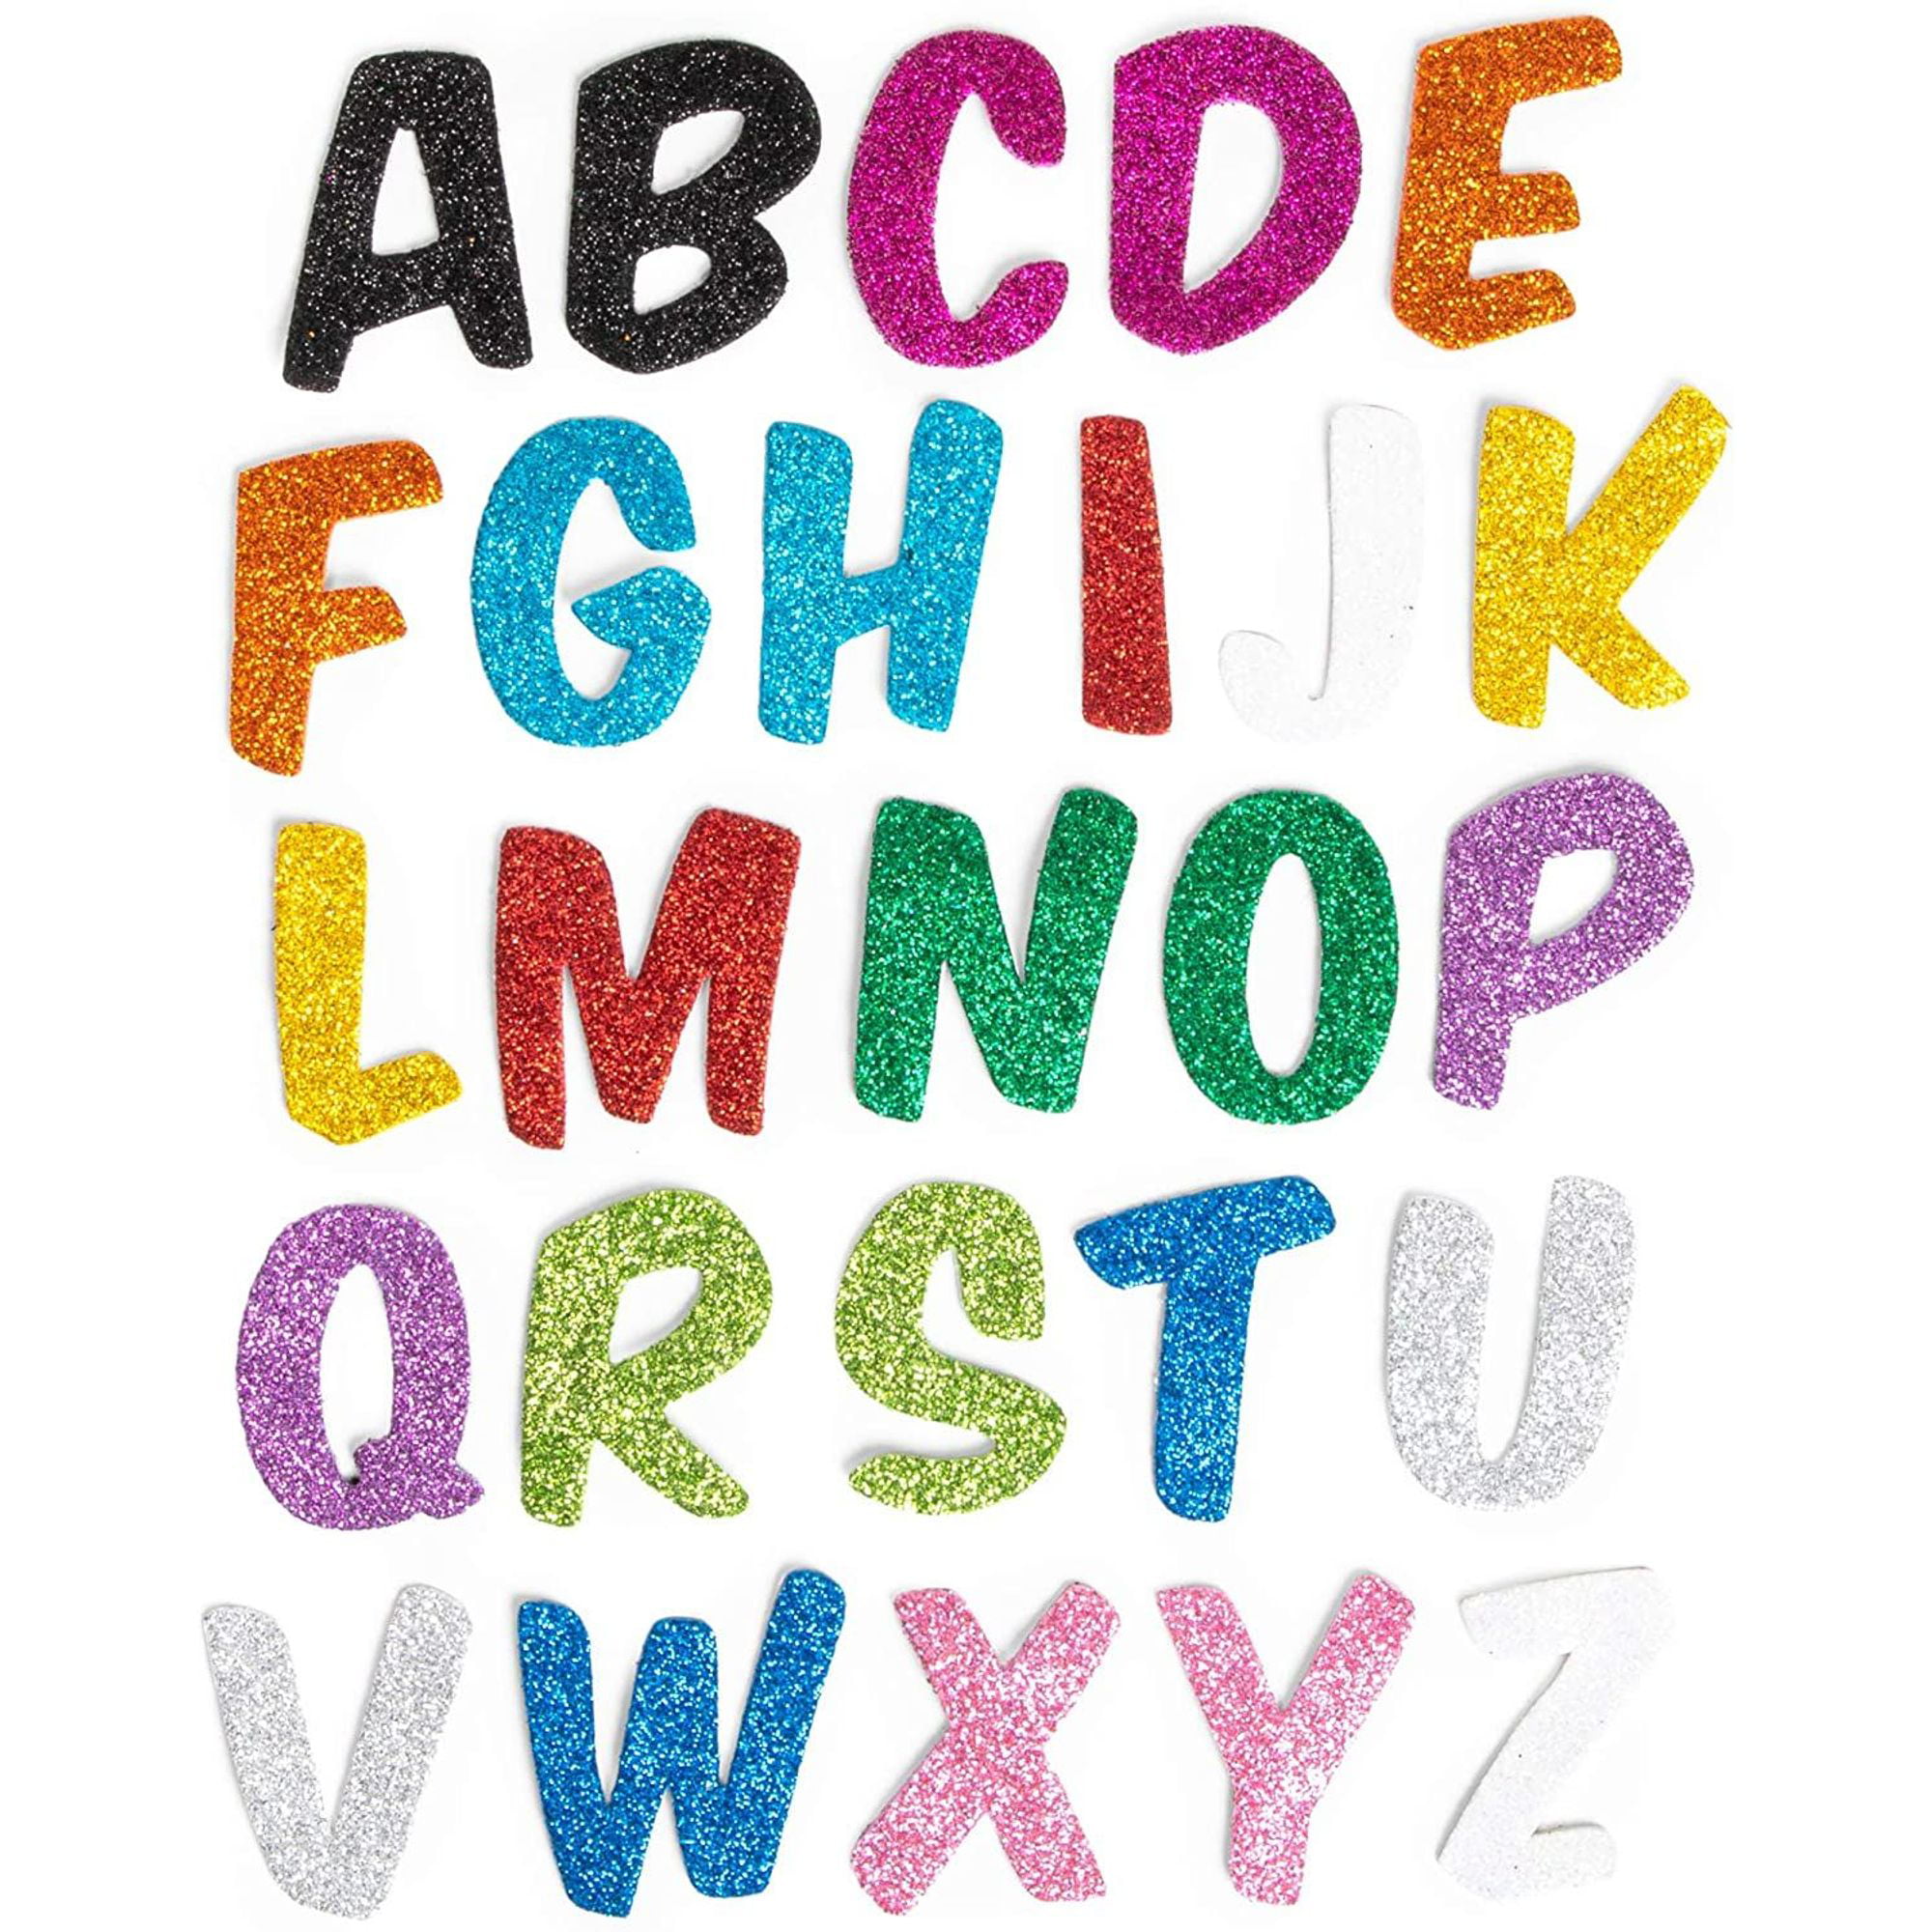 Alphabet Labels Printable - Printable Word Searches